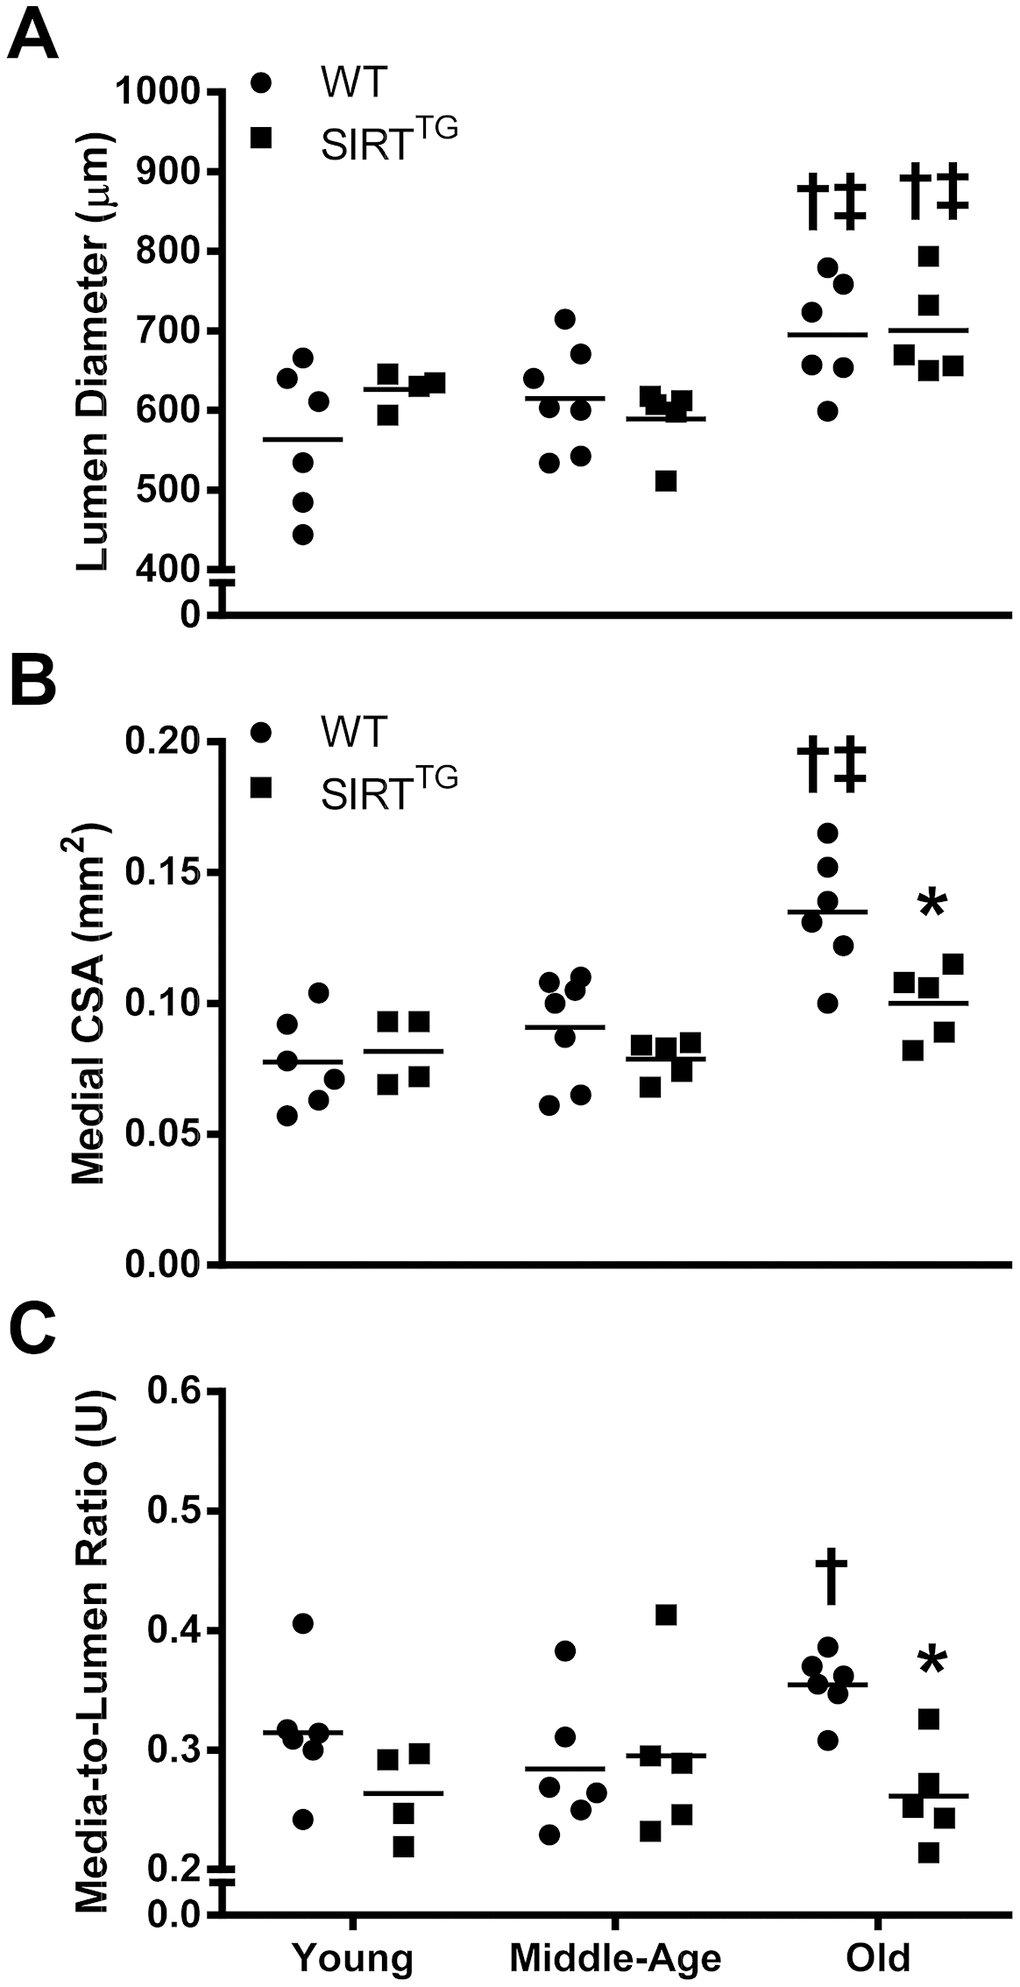 Thoracic aorta lumen diameter (A), medial cross-sectional area (B [CSA]), and media-to-lumen ratio (C) in young, middle-age, and old wild-type (WT) and SIRT-1 transgenic overexpressing (SIRTTG) mice. *P†P‡P